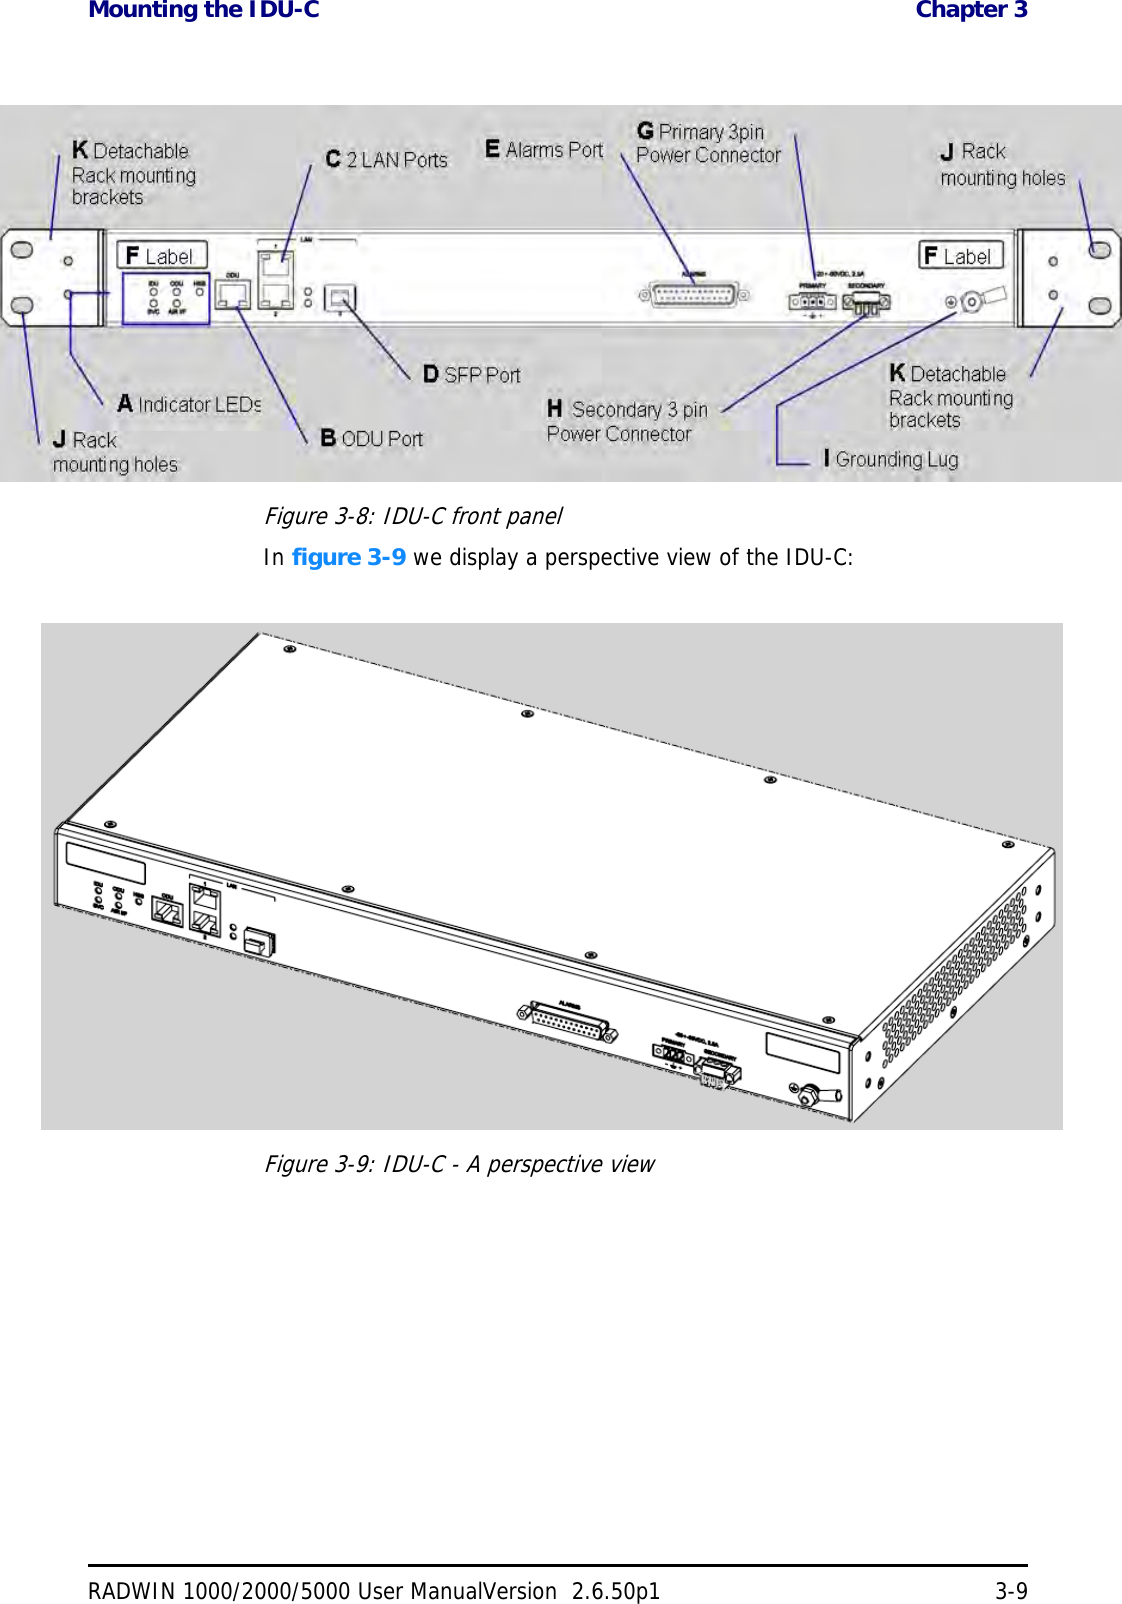 Mounting the IDU-C  Chapter 3RADWIN 1000/2000/5000 User ManualVersion  2.6.50p1 3-9Figure 3-8: IDU-C front panelIn figure 3-9 we display a perspective view of the IDU-C:Figure 3-9: IDU-C - A perspective view